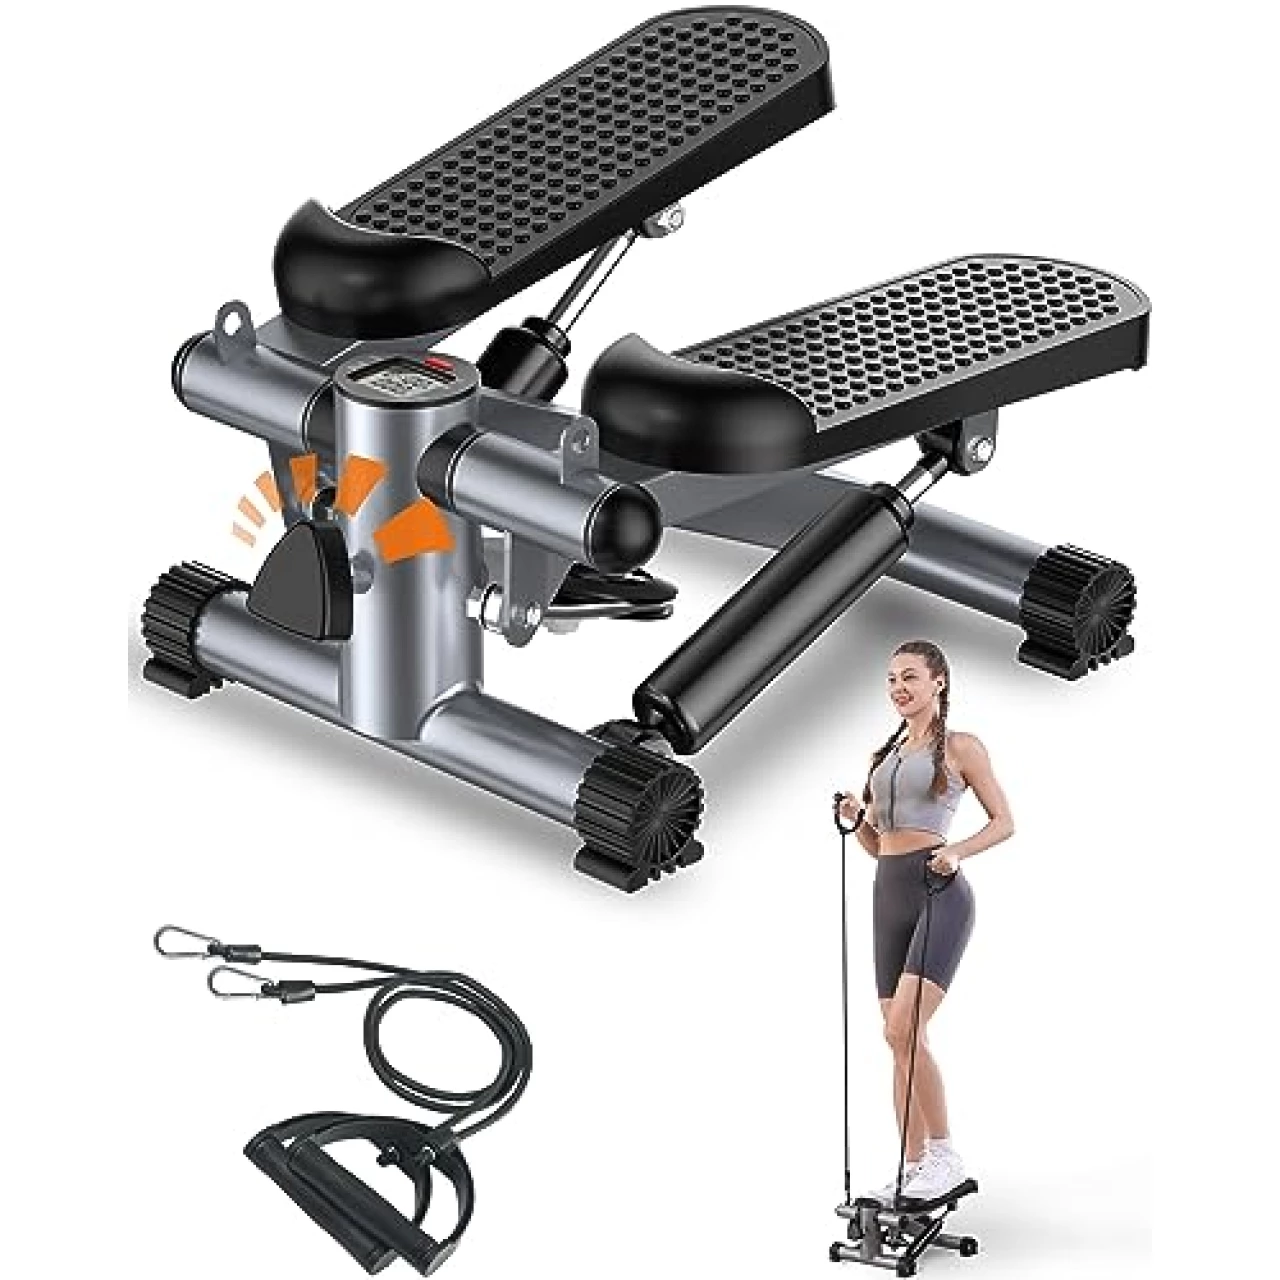 Steppers for Exercise,Mini Stepper with Exercise Equipment for Home Workouts,Hydraulic Fitness Stair Stepper with Resistance Band &amp; Calories Count 350lbs Weight Capacity